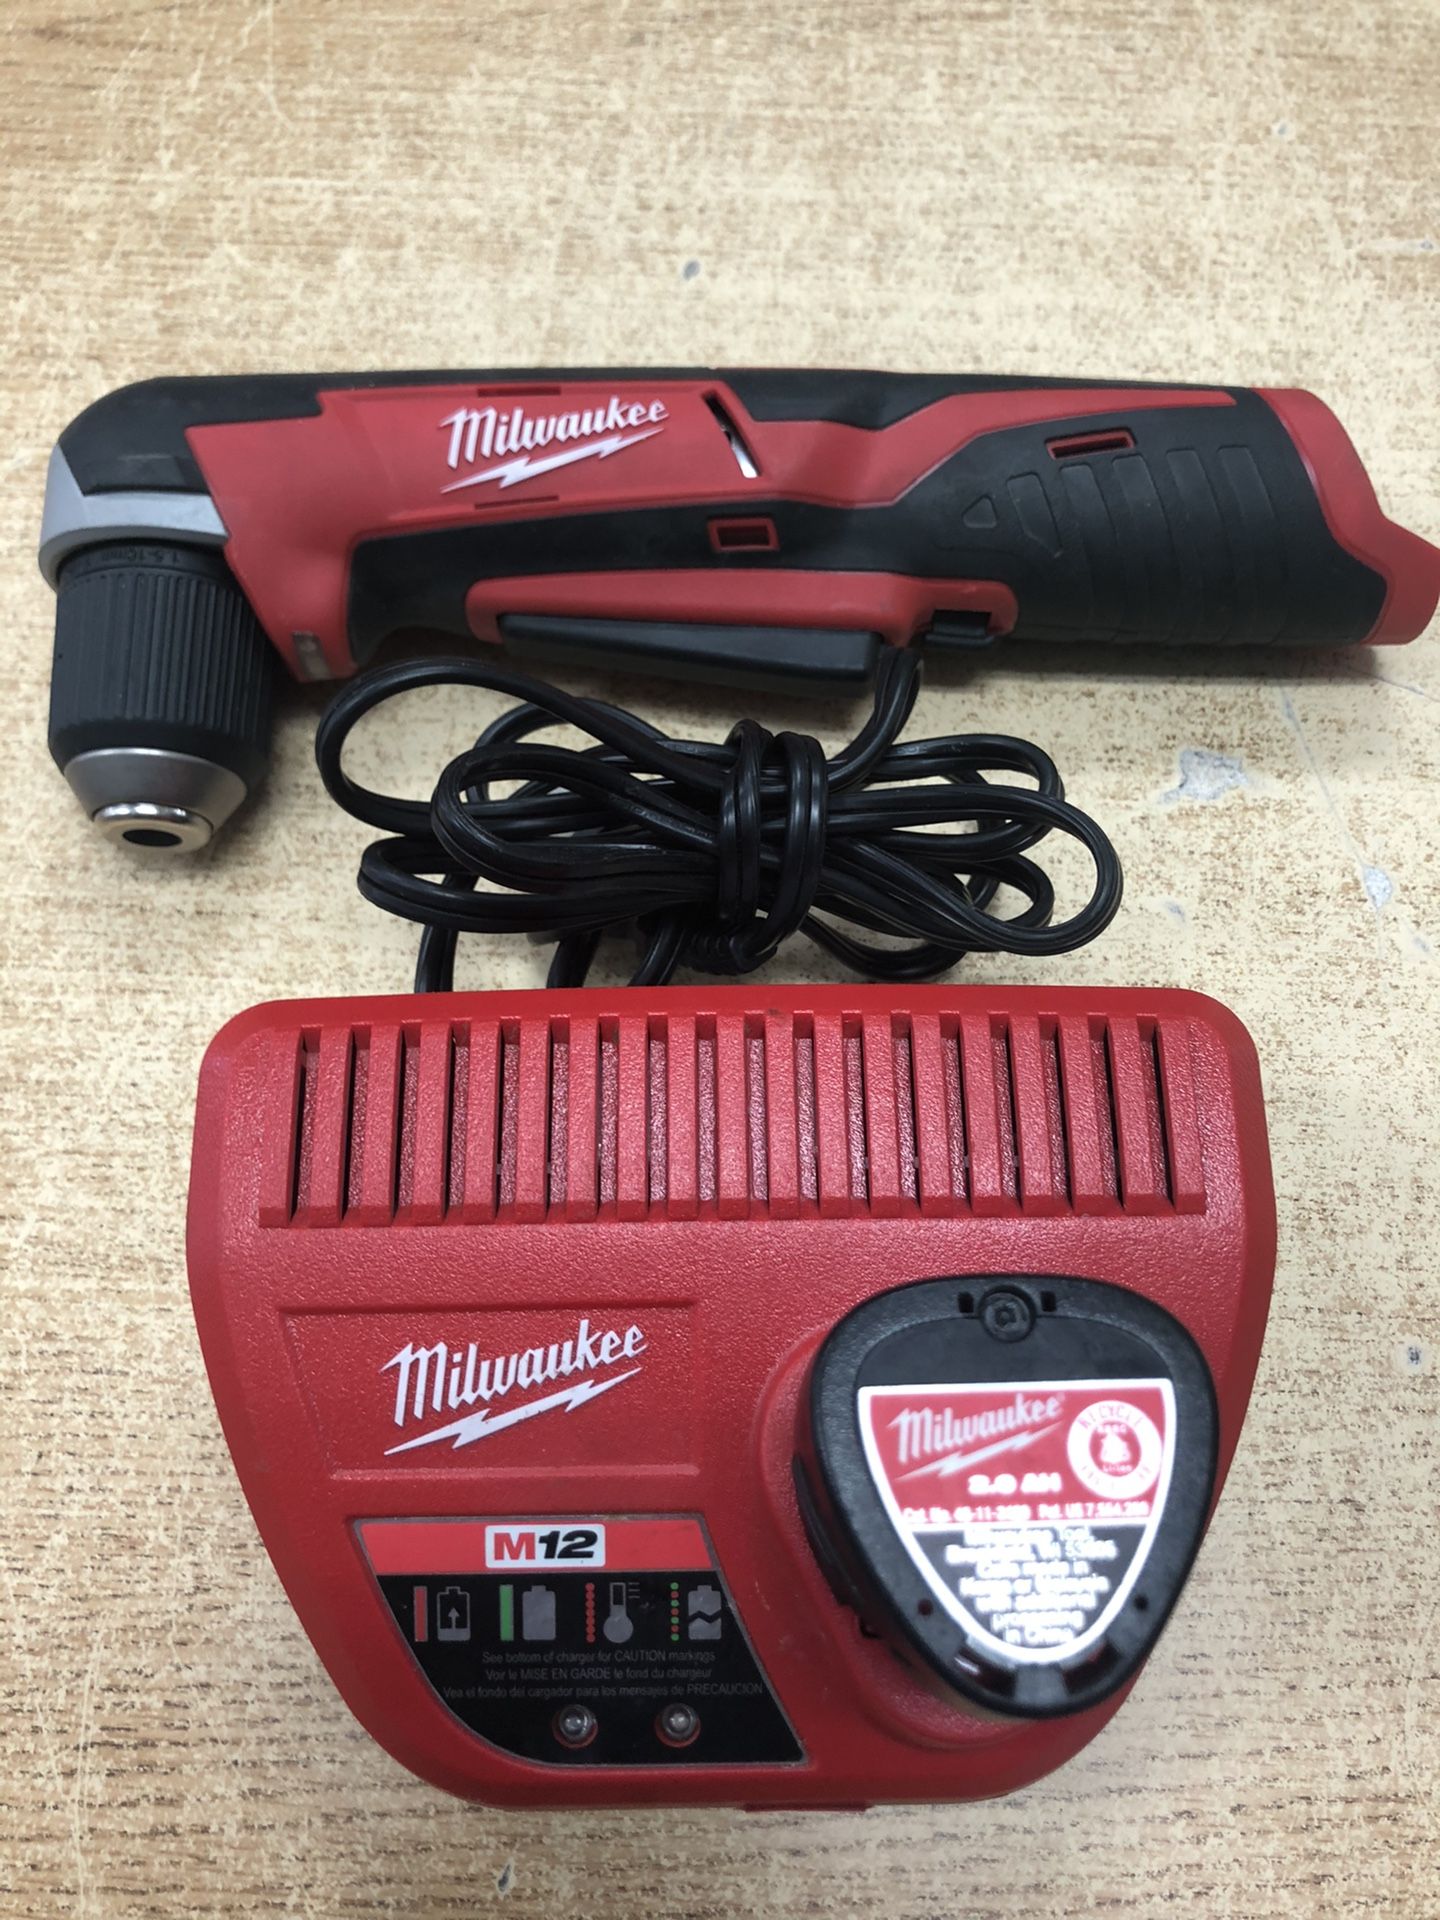 Milwaukee 2415-21 M12 12V Lithium-Ion Cordless 3/8" Right-Angle Drill Kit